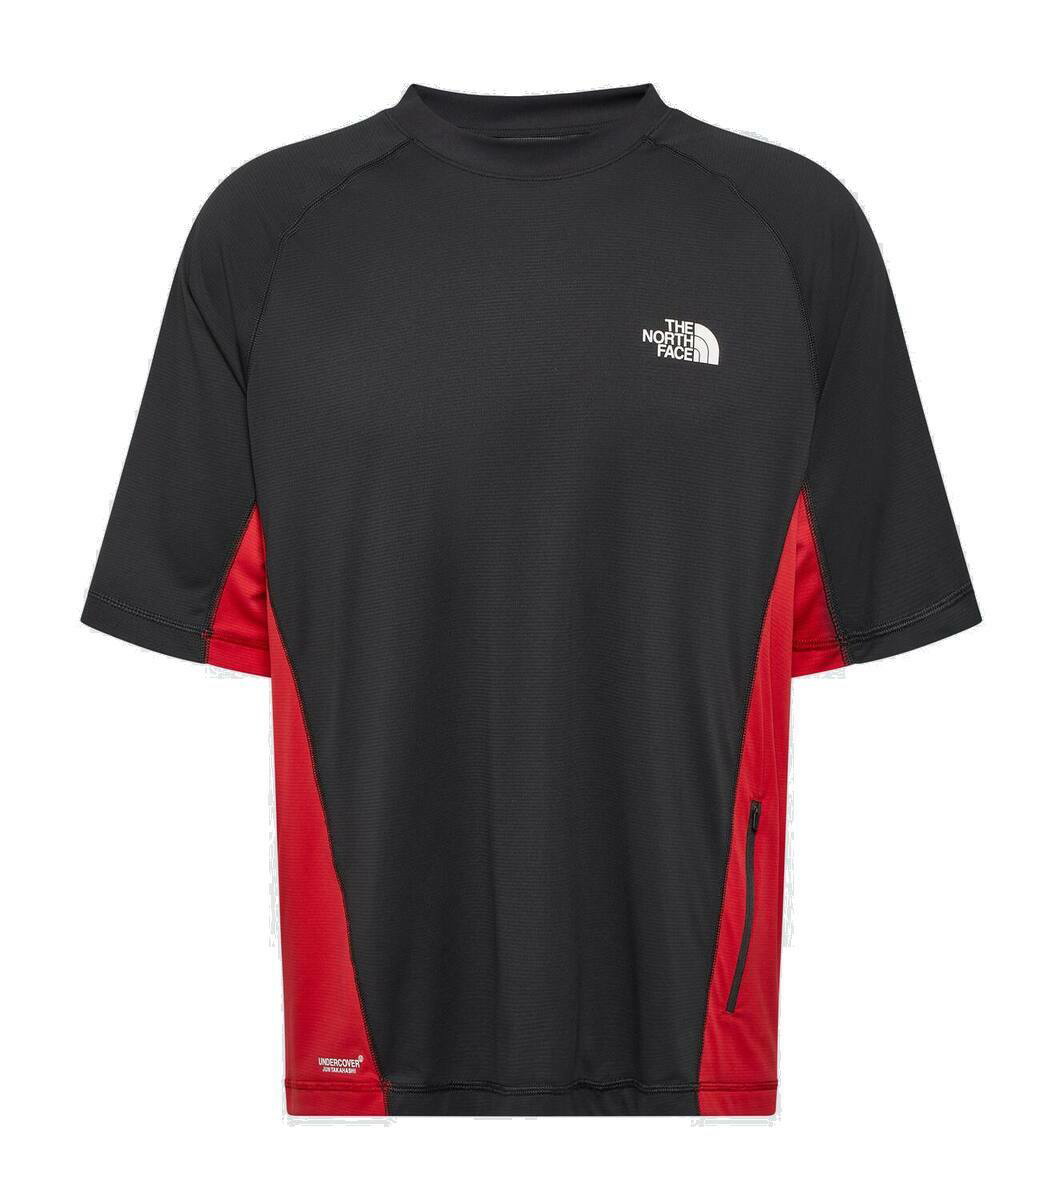 Photo: The North Face x Undercover technical T-shirt